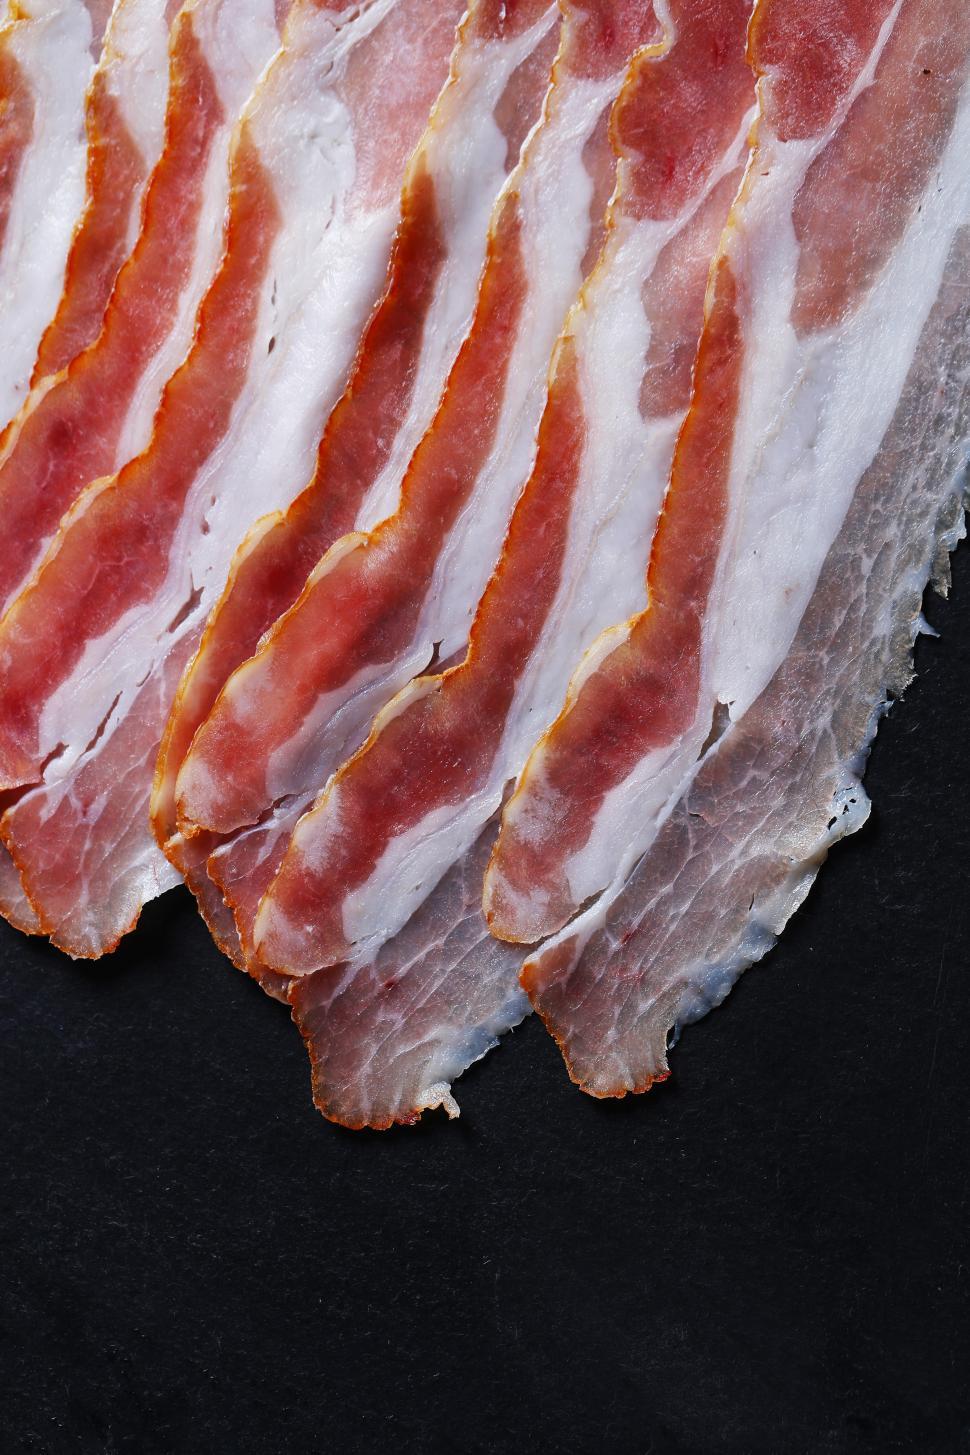 Free Image of Slices of raw bacon 